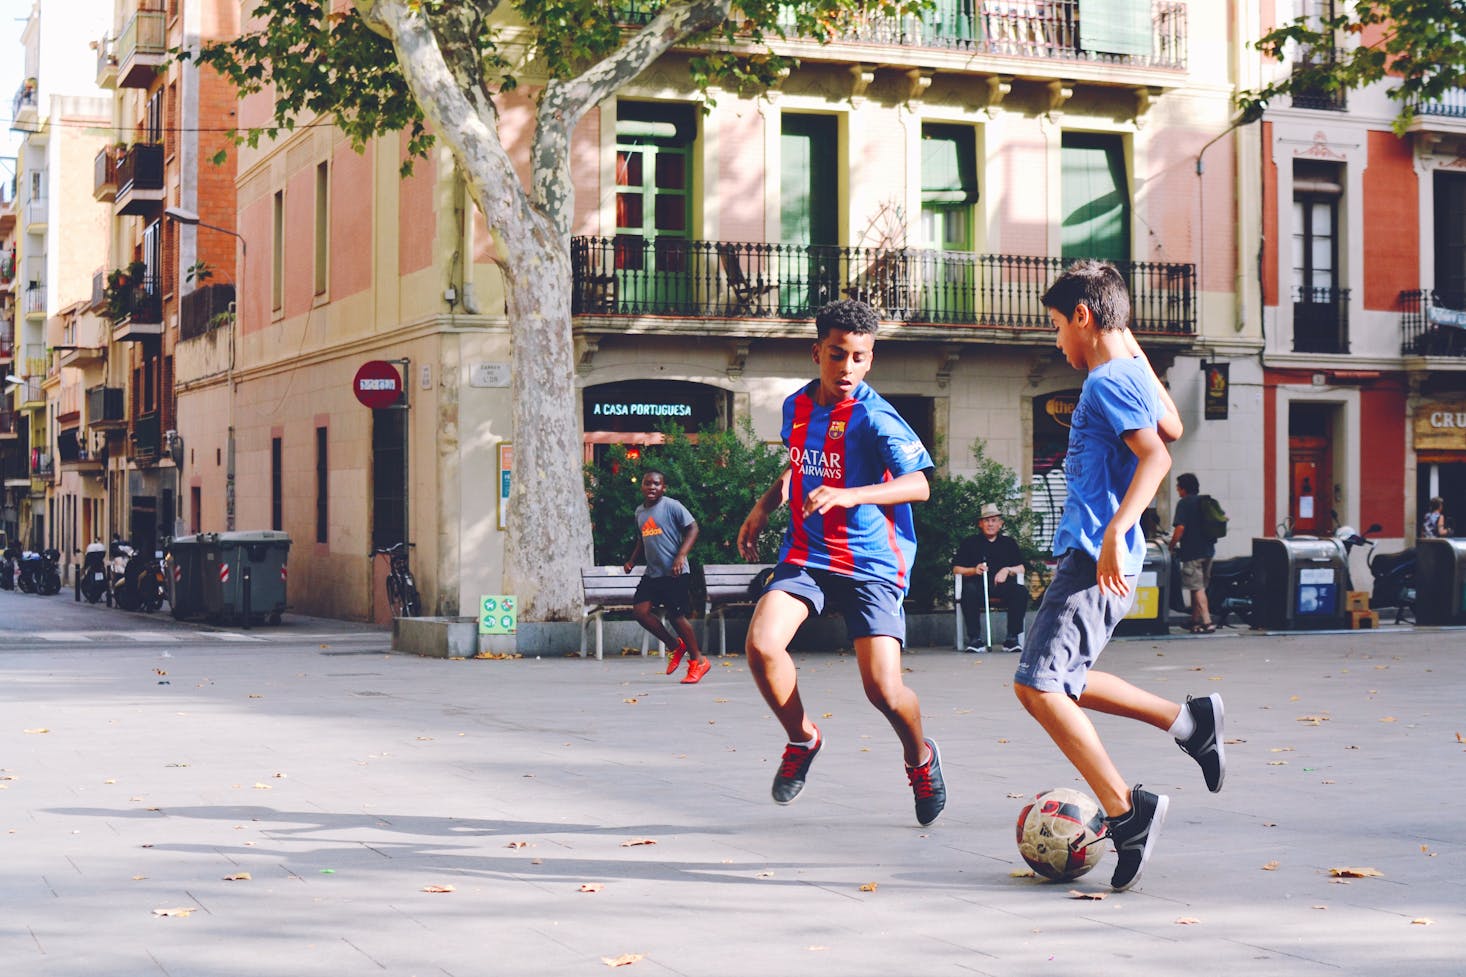 Playing soccer in Barcelona